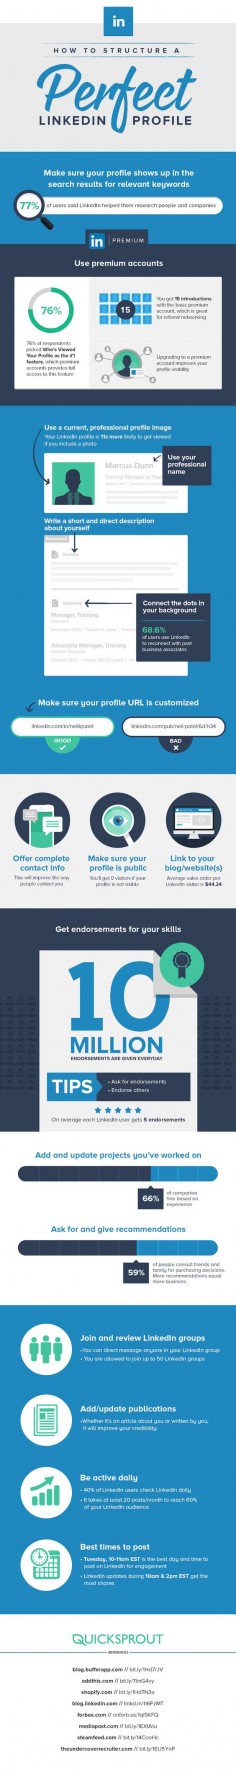 How to Structure a Perfect #LinkedIn Profile - #infographic #socialmedia